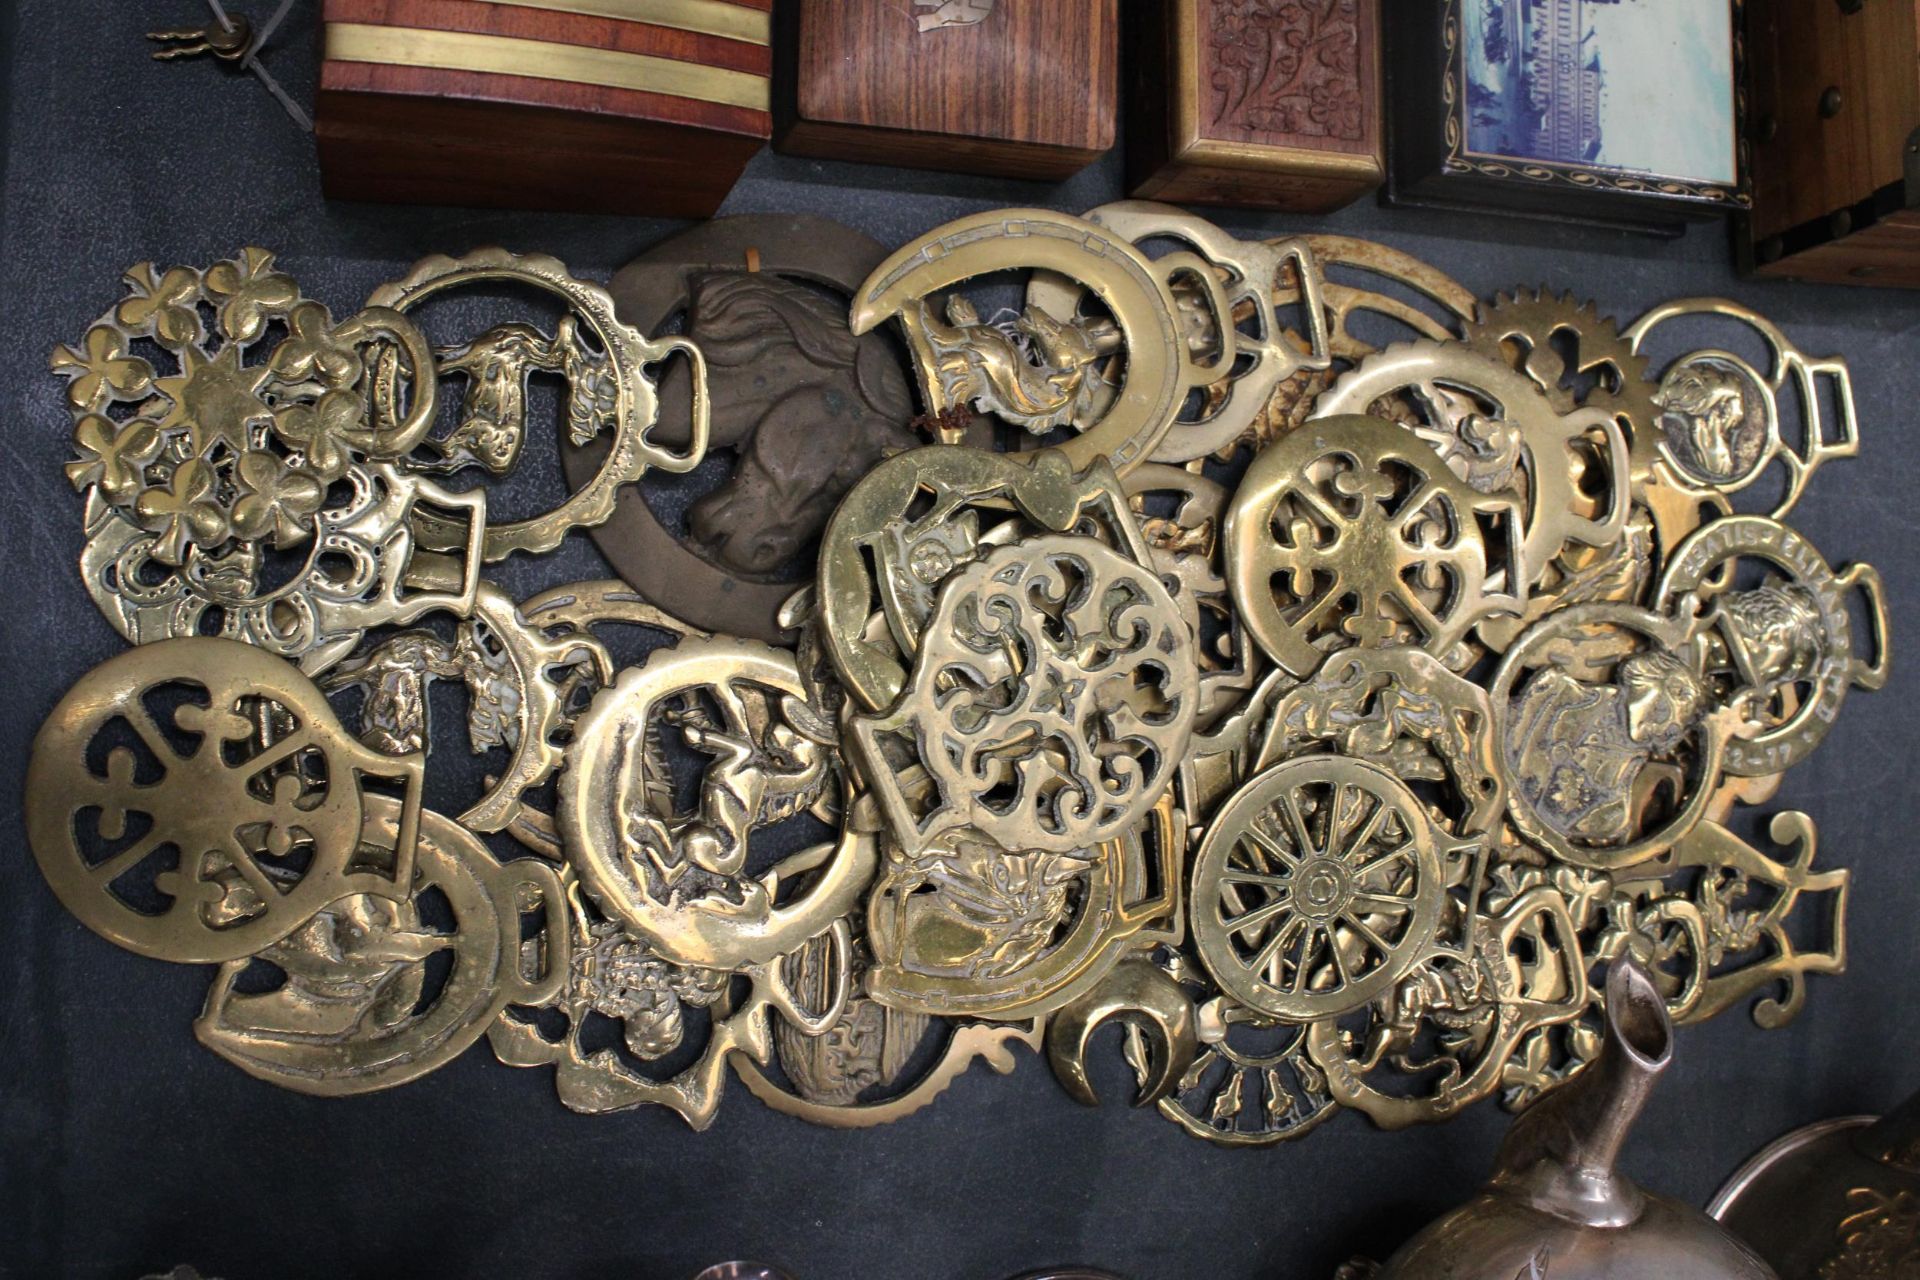 A LARGE COLLECTIONOF HORSE BRASSES